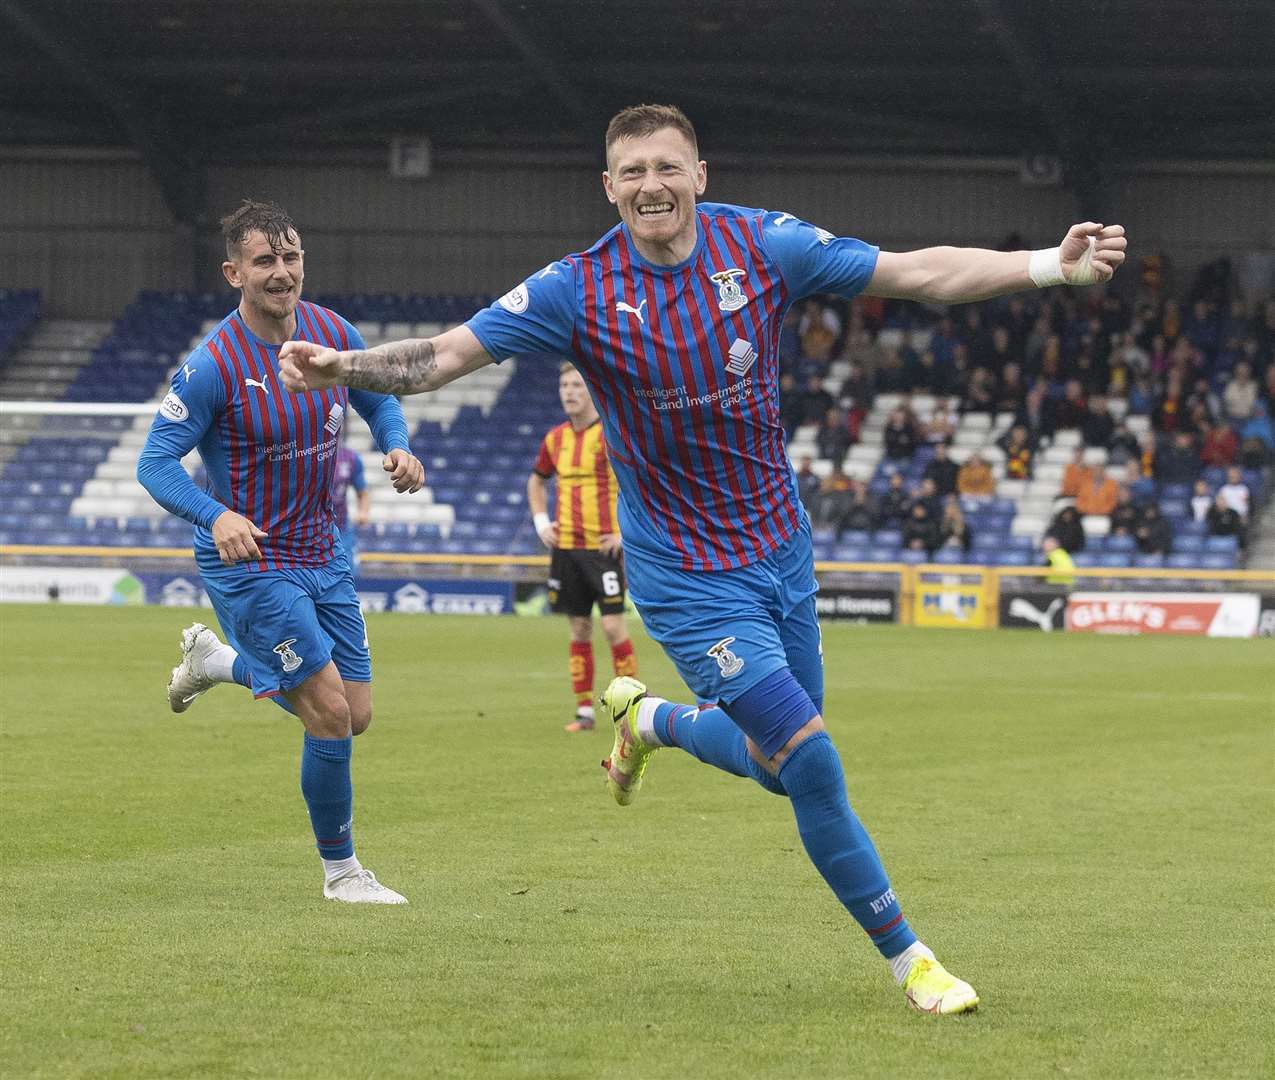 Picture - Ken Macpherson, Inverness. Inverness CT(3) v Partick Thistle(1). 11.09.21. ICT’s Shane Sutherland celebrates his goal.